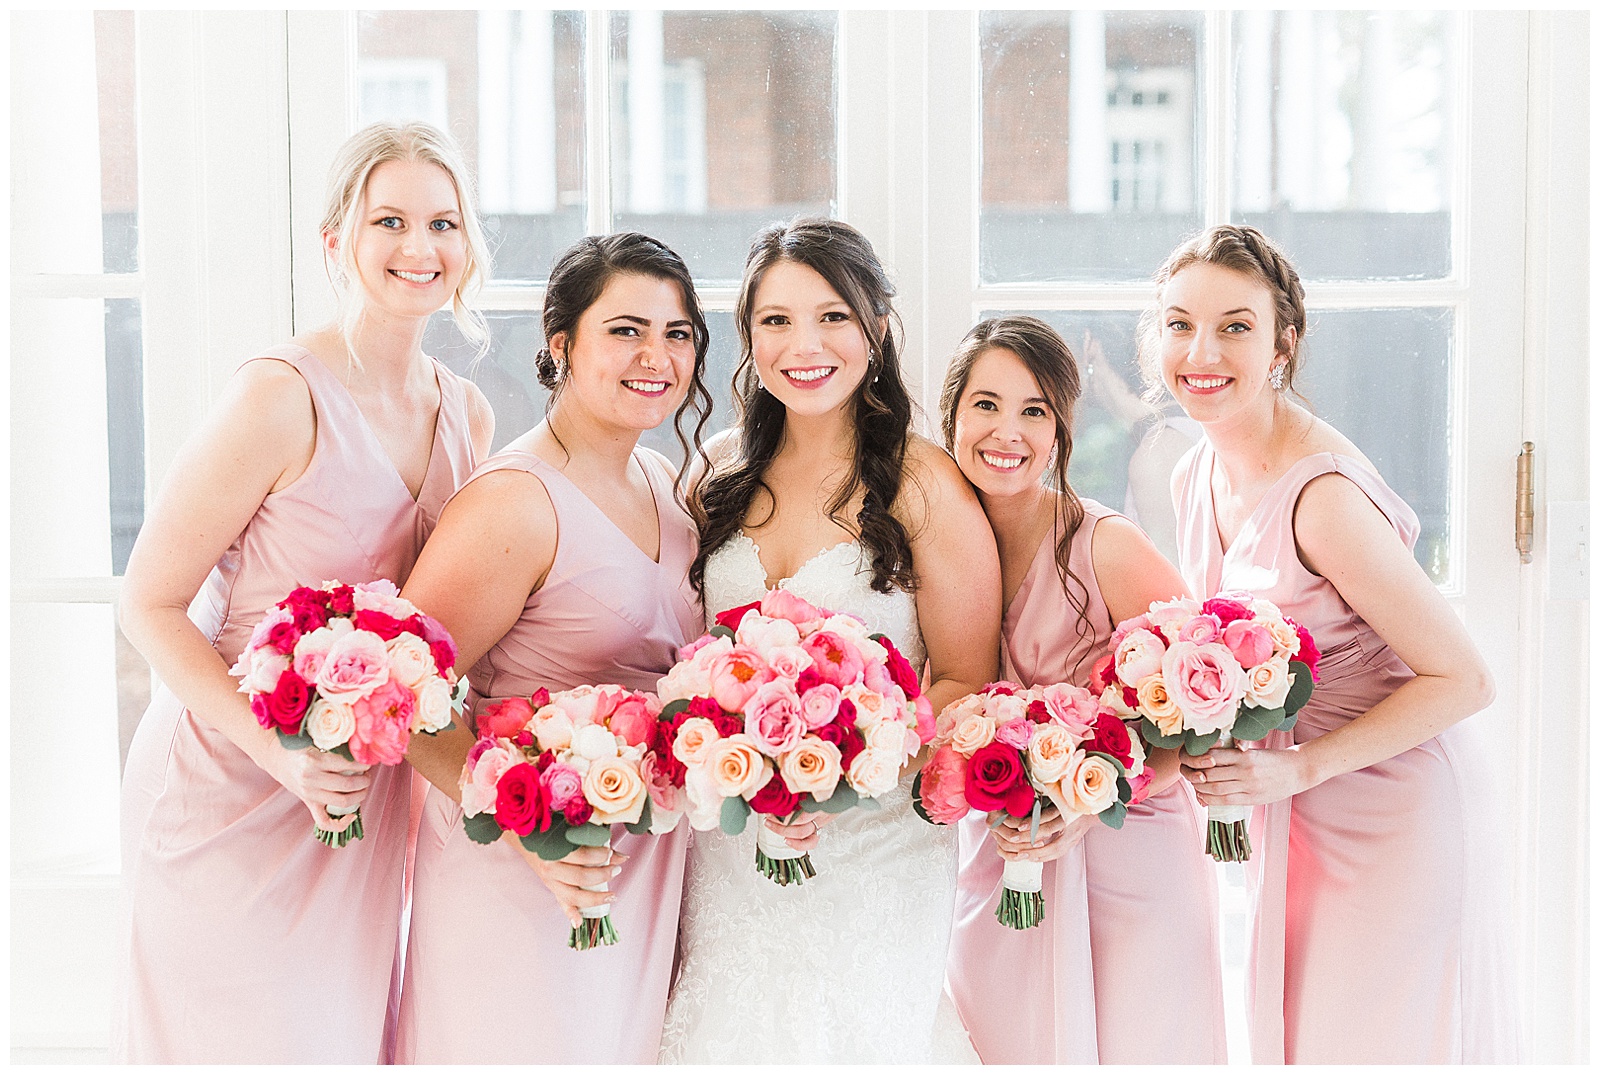 Soft Pink Color Theme Bridesmaid Bride Tribe Group Photo from Light and Airy Outdoor Wedding at Separk Mansion in Gastonia, NC | Kevyn Dixon Photography